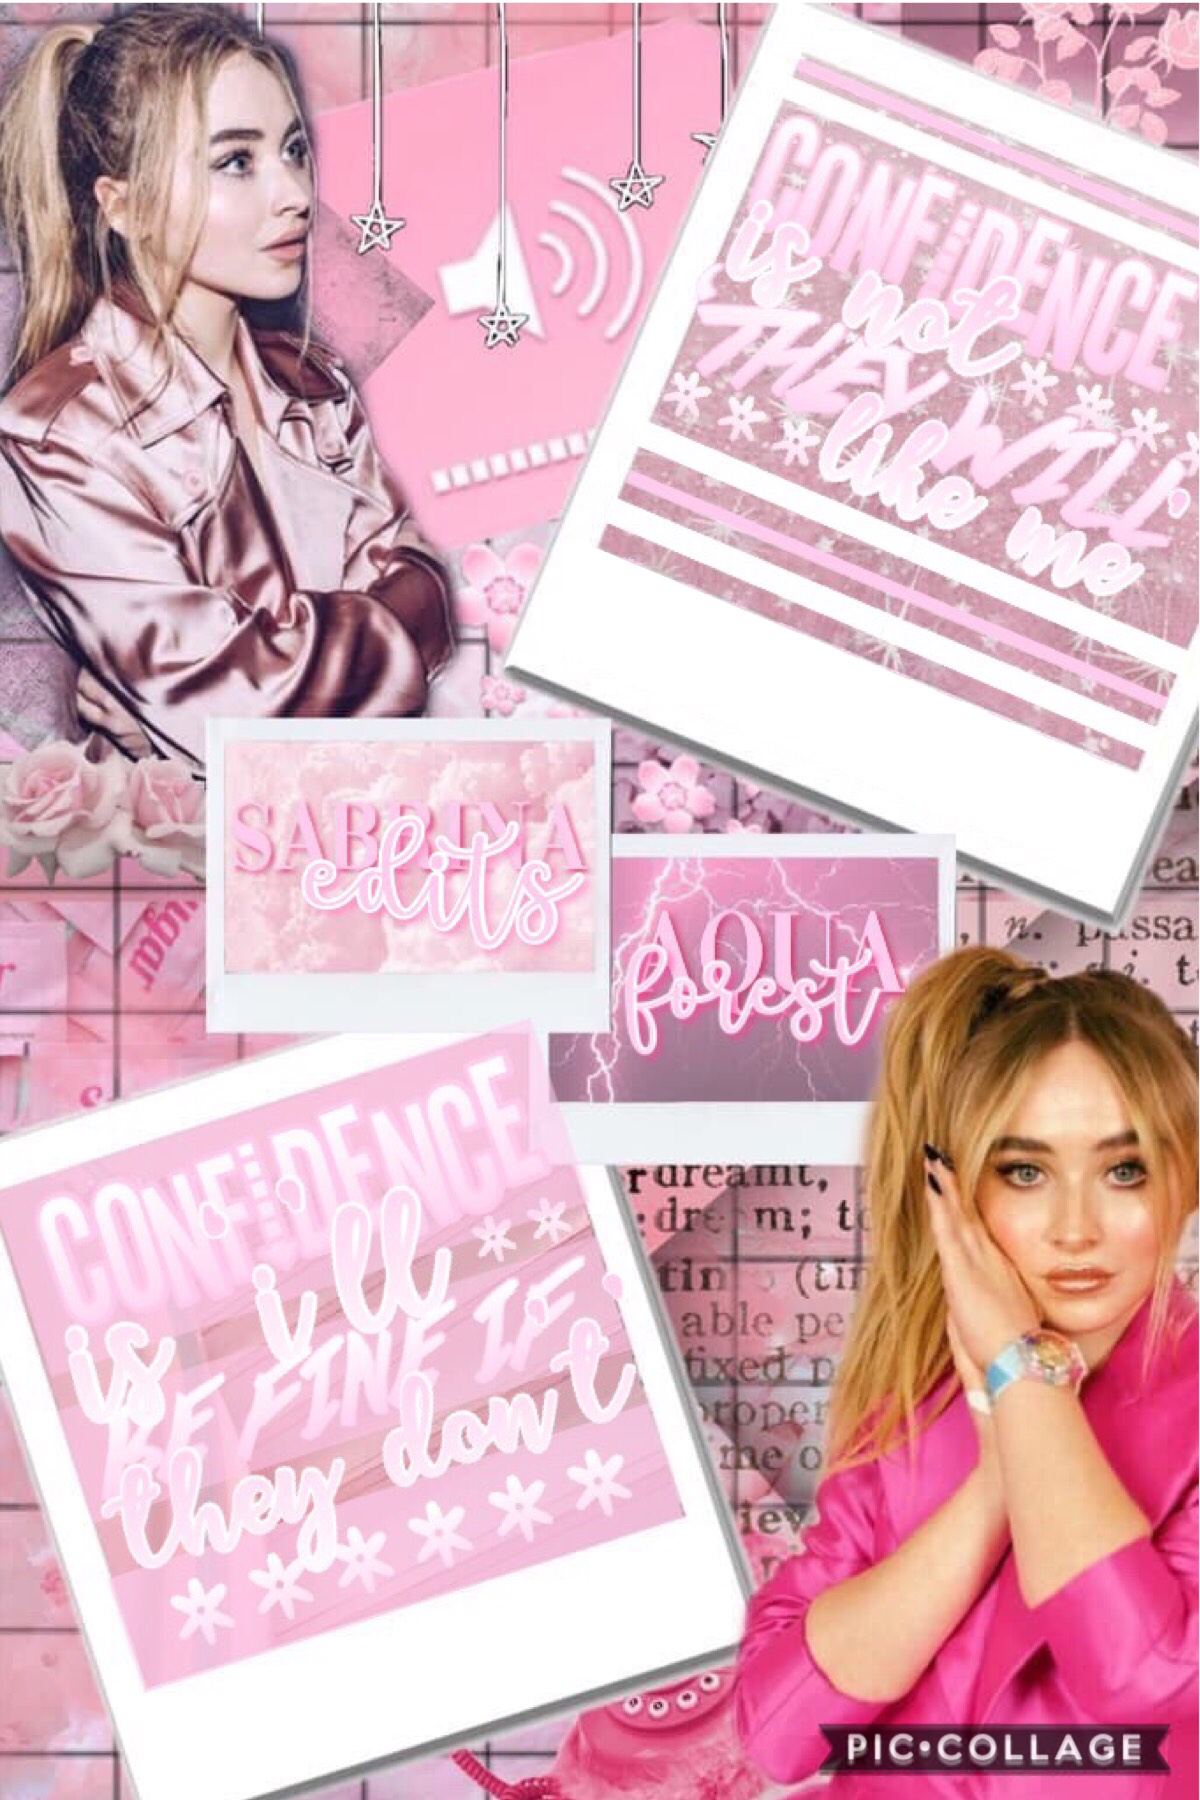 COLLAB WITH THE ONE AND ONLY...🥁🥁🥁
SabrinaEdits!!!!!
She did the SPECTACULAR bg!
If you haven’t go give her a follow right now! 
Woot woot four collabs in a row 😂 